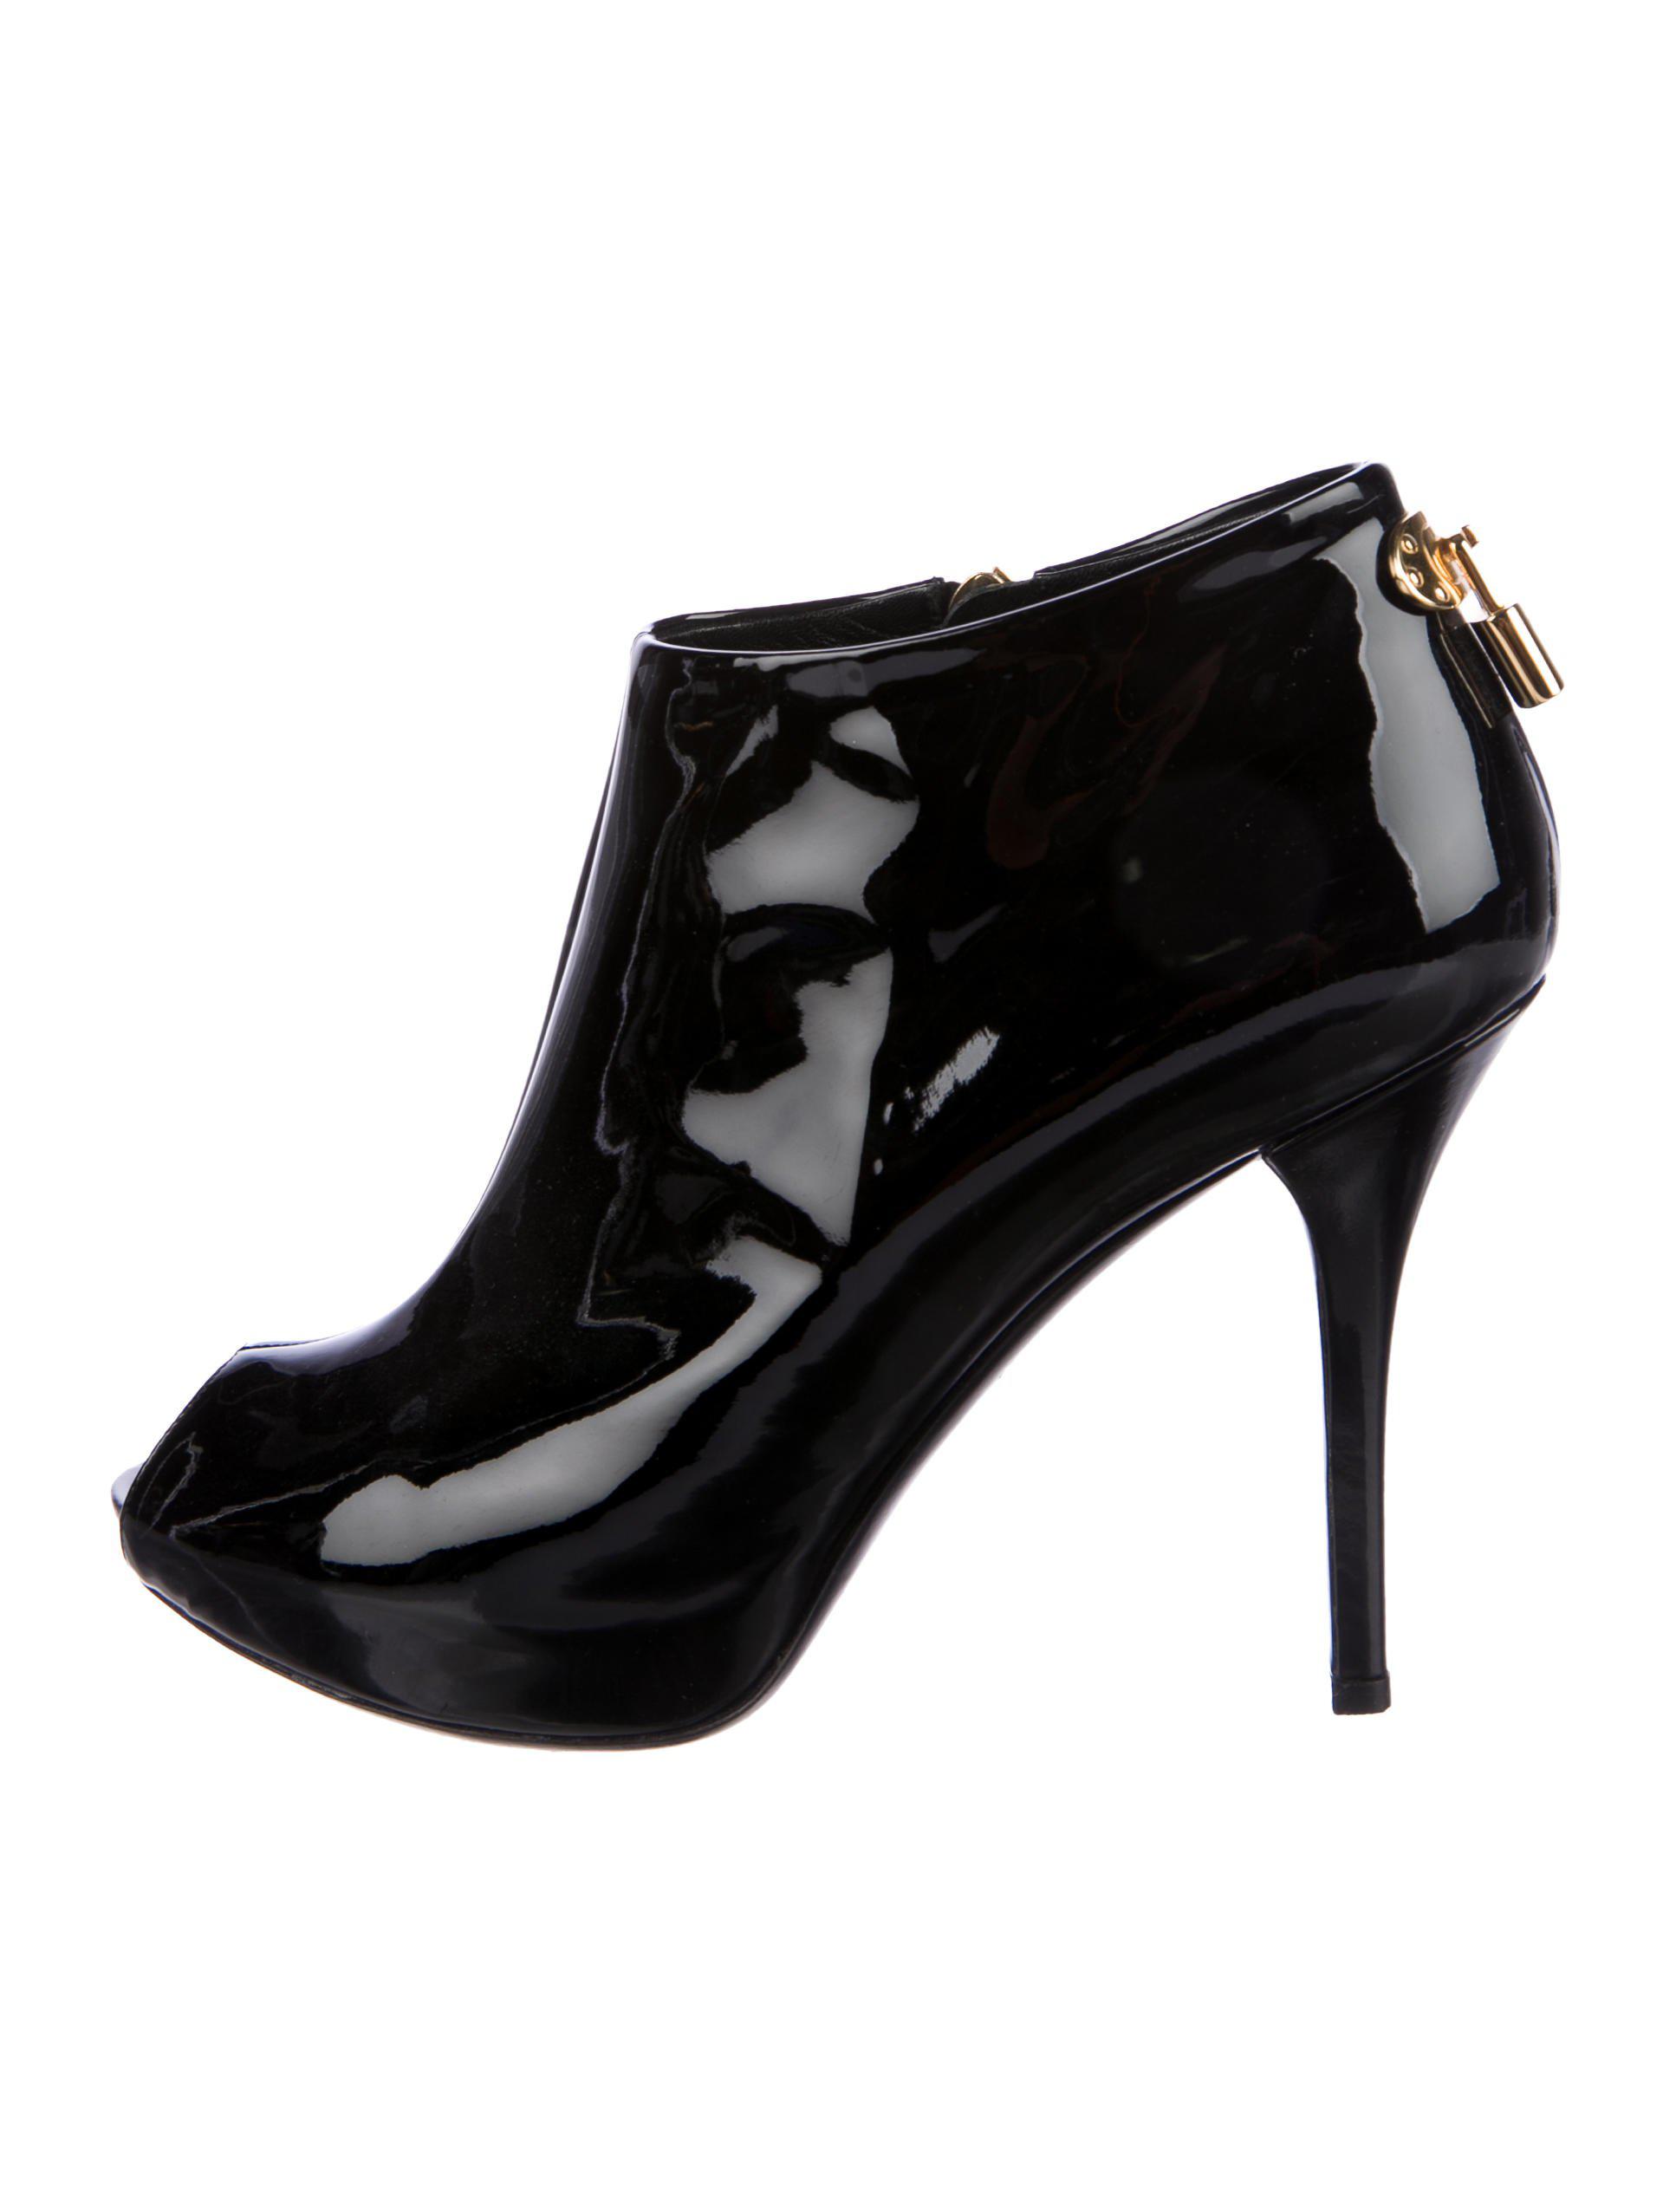 Lyst - Louis Vuitton Oh Really! Ankle Boots in Black